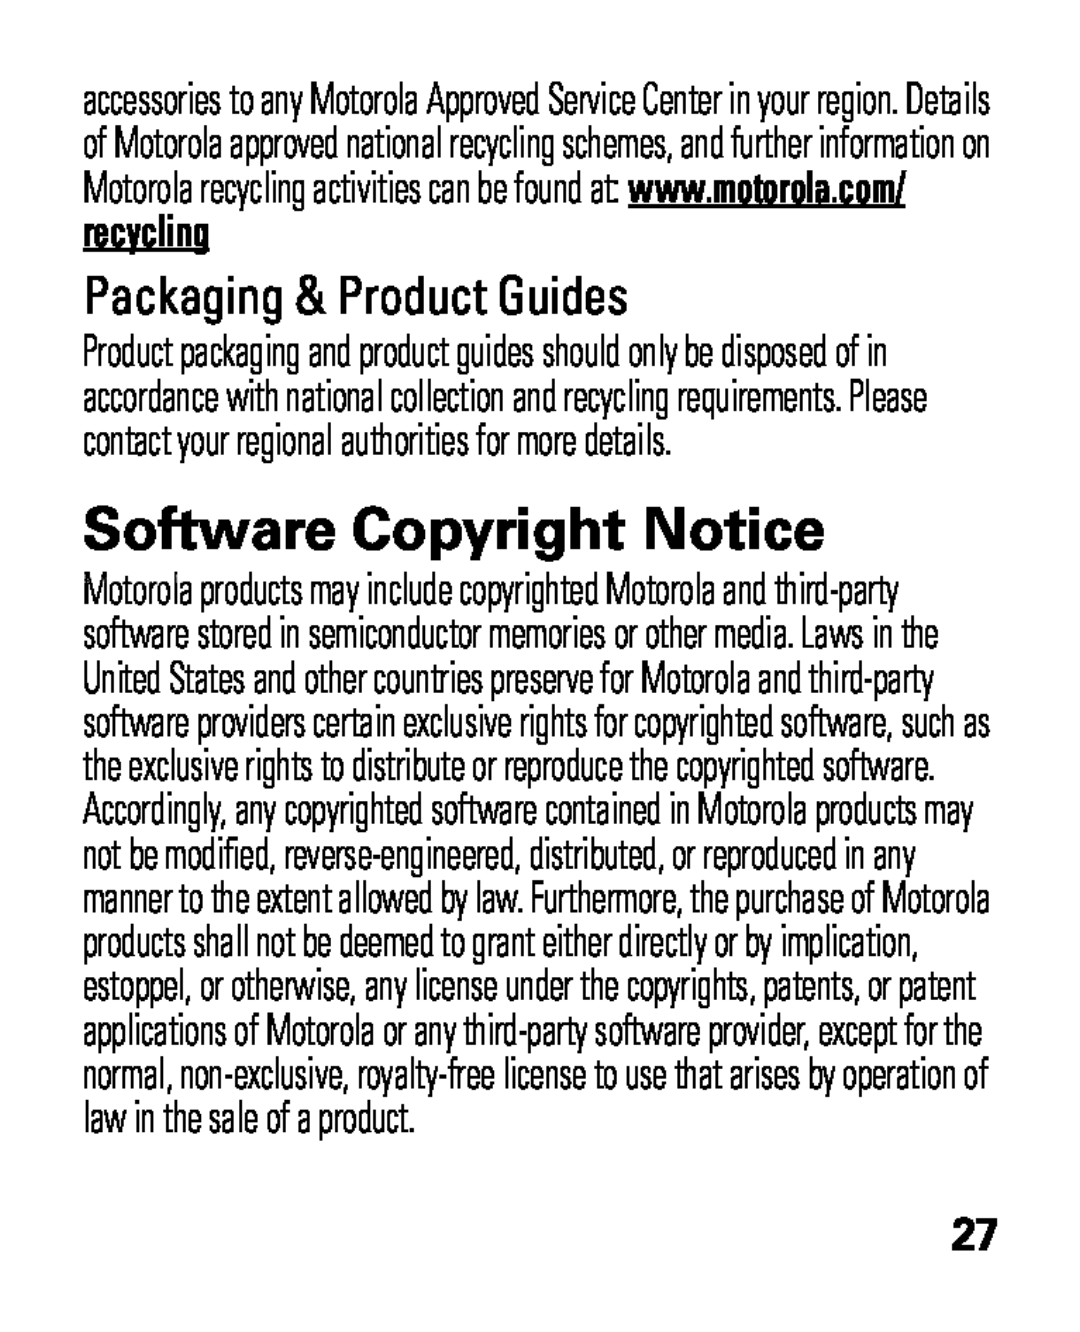 Motorola HK100 quick start Software Copyright Notice, Packaging & Product Guides, recycling 